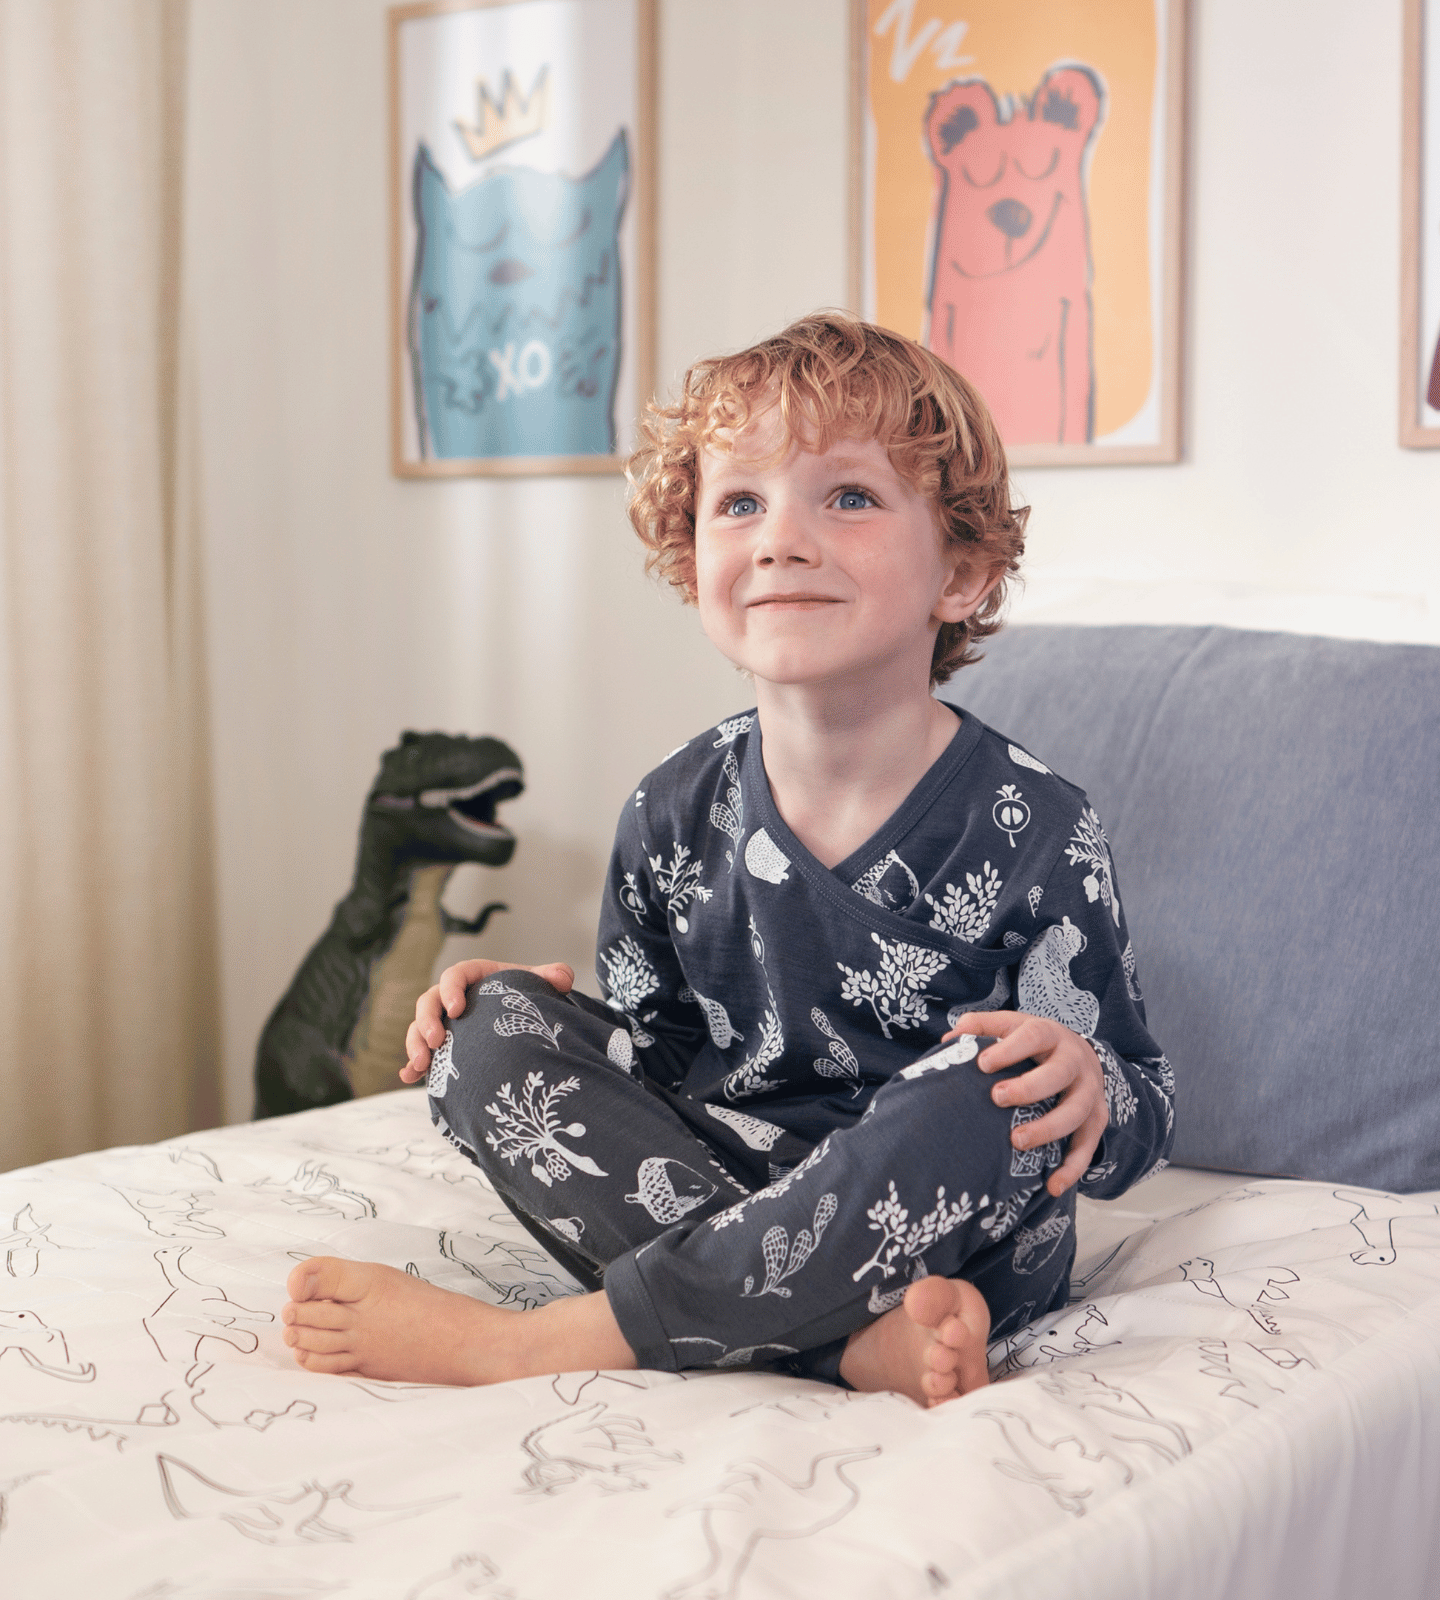 Brolly Sheets NZ – Waterproof Bedding for Bed Wetting and Incontinence